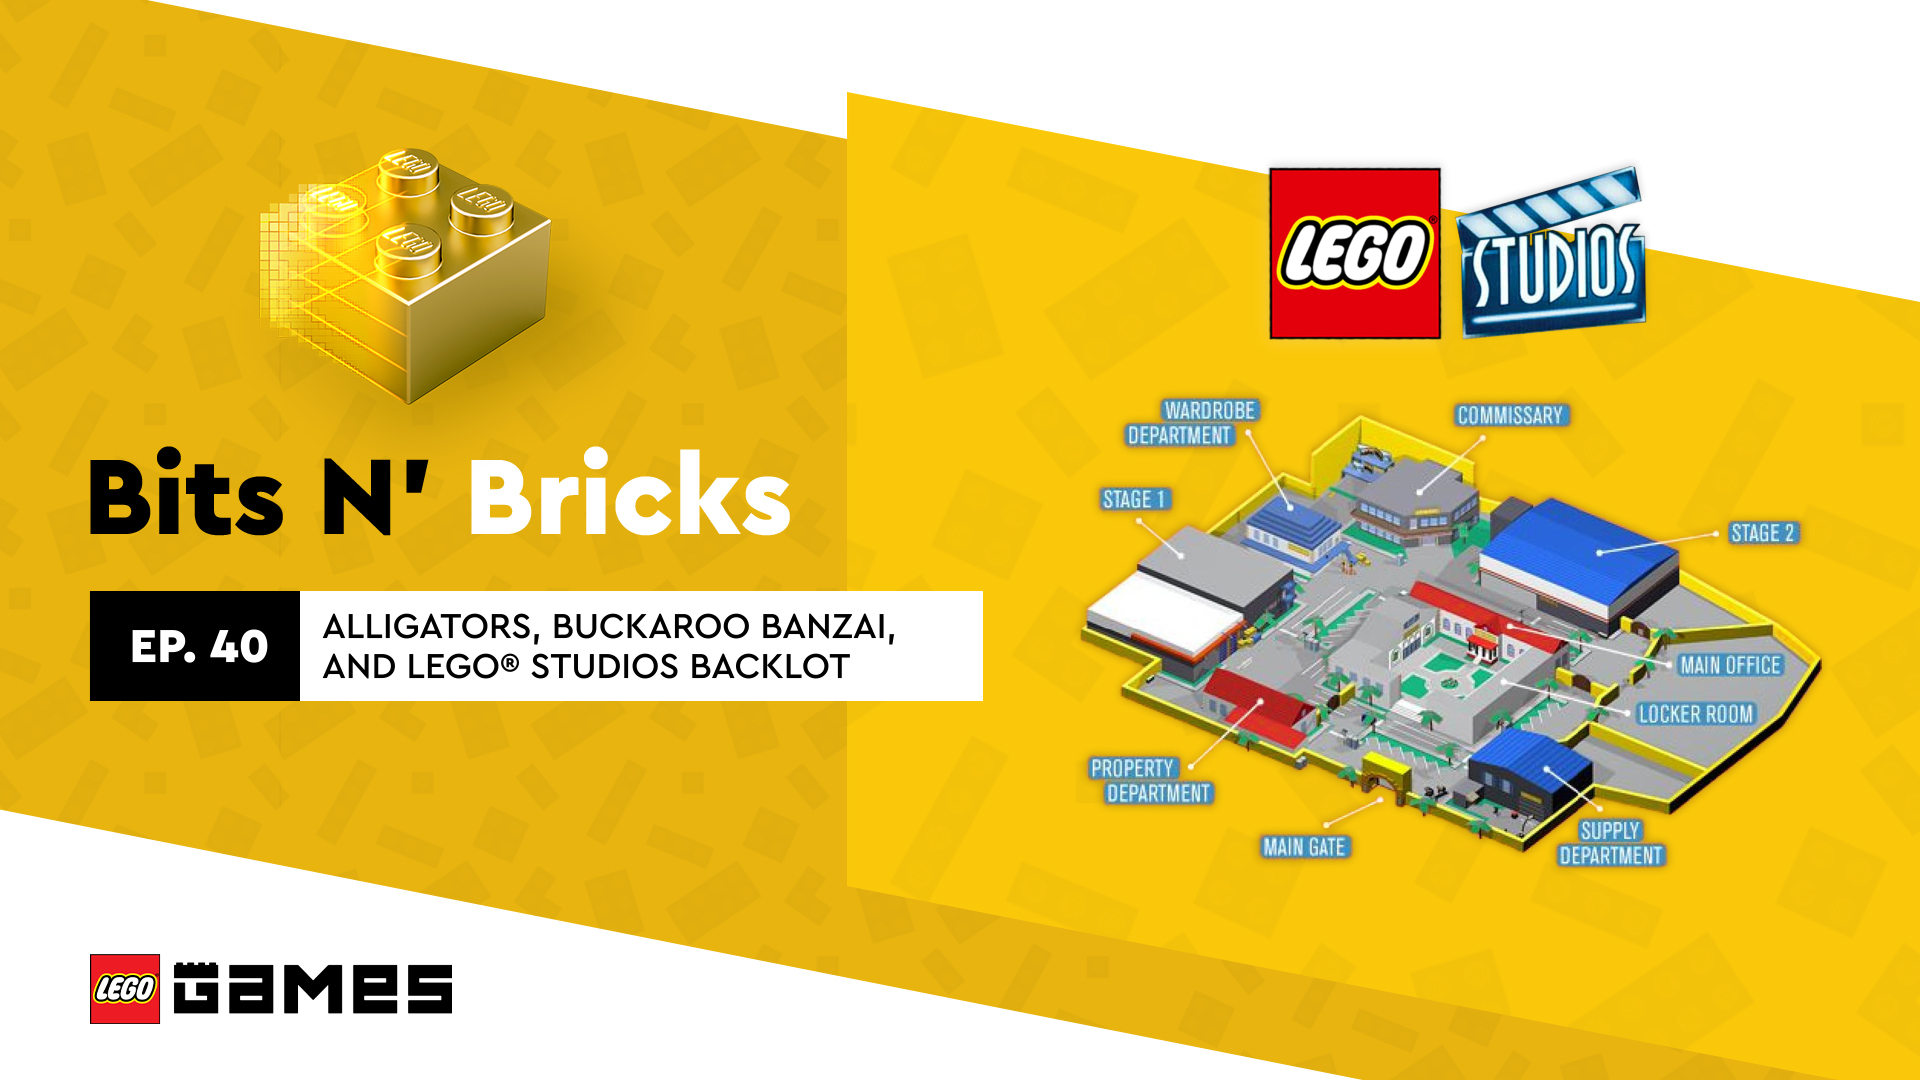 LEGO Twitter: "Remember playing LEGO Studios Backlot 🐊🐊🐊 on https://t.co/rX3wEfQL2h? This week, Bits N' Bricks goes behind the scenes of this hidden gem that dropped onto a working movie studio.